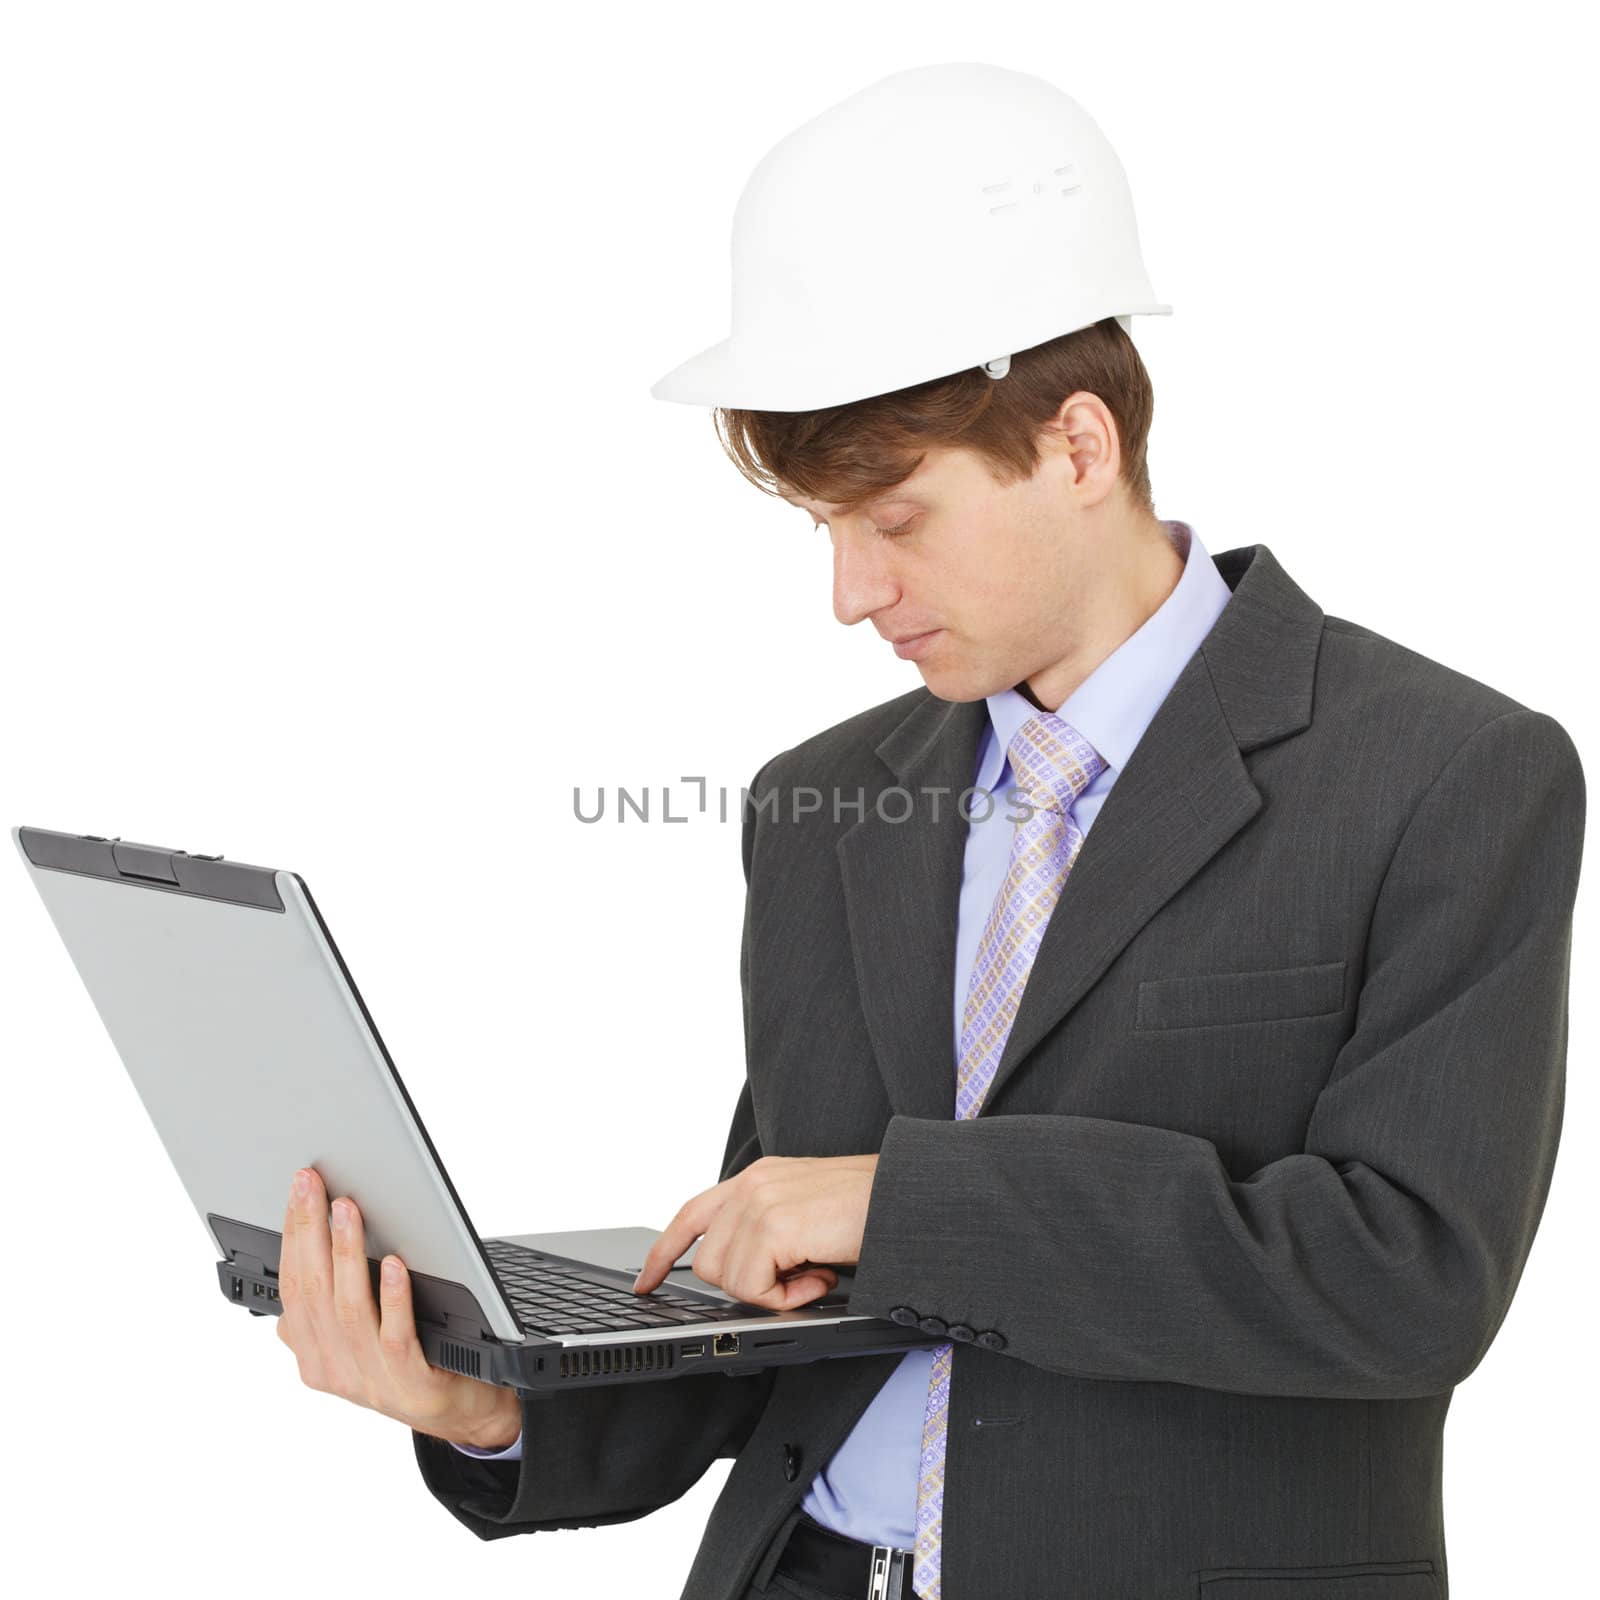 The builder works with the laptop holding it on hands on white background